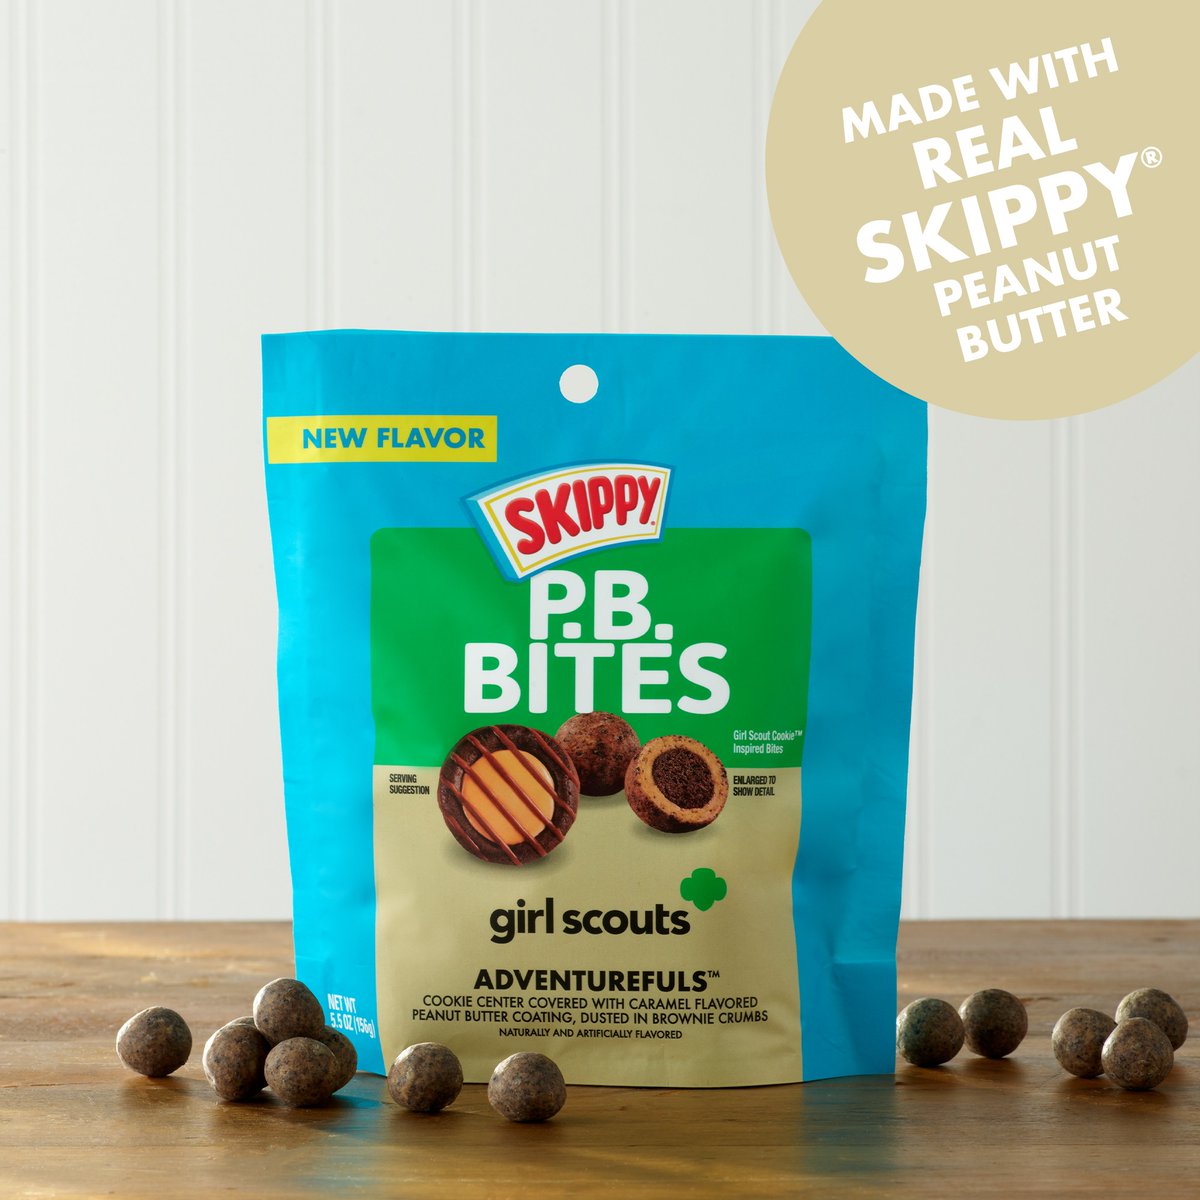 Inspired by the popular Girl Scout Adventurefuls™ Cookie, this delicious flavor boasts a chocolatey cookie center, enveloped in a tantalizing SKIPPY® peanut butter coating with delightful hints of caramel and tossed with salt and brownie dust